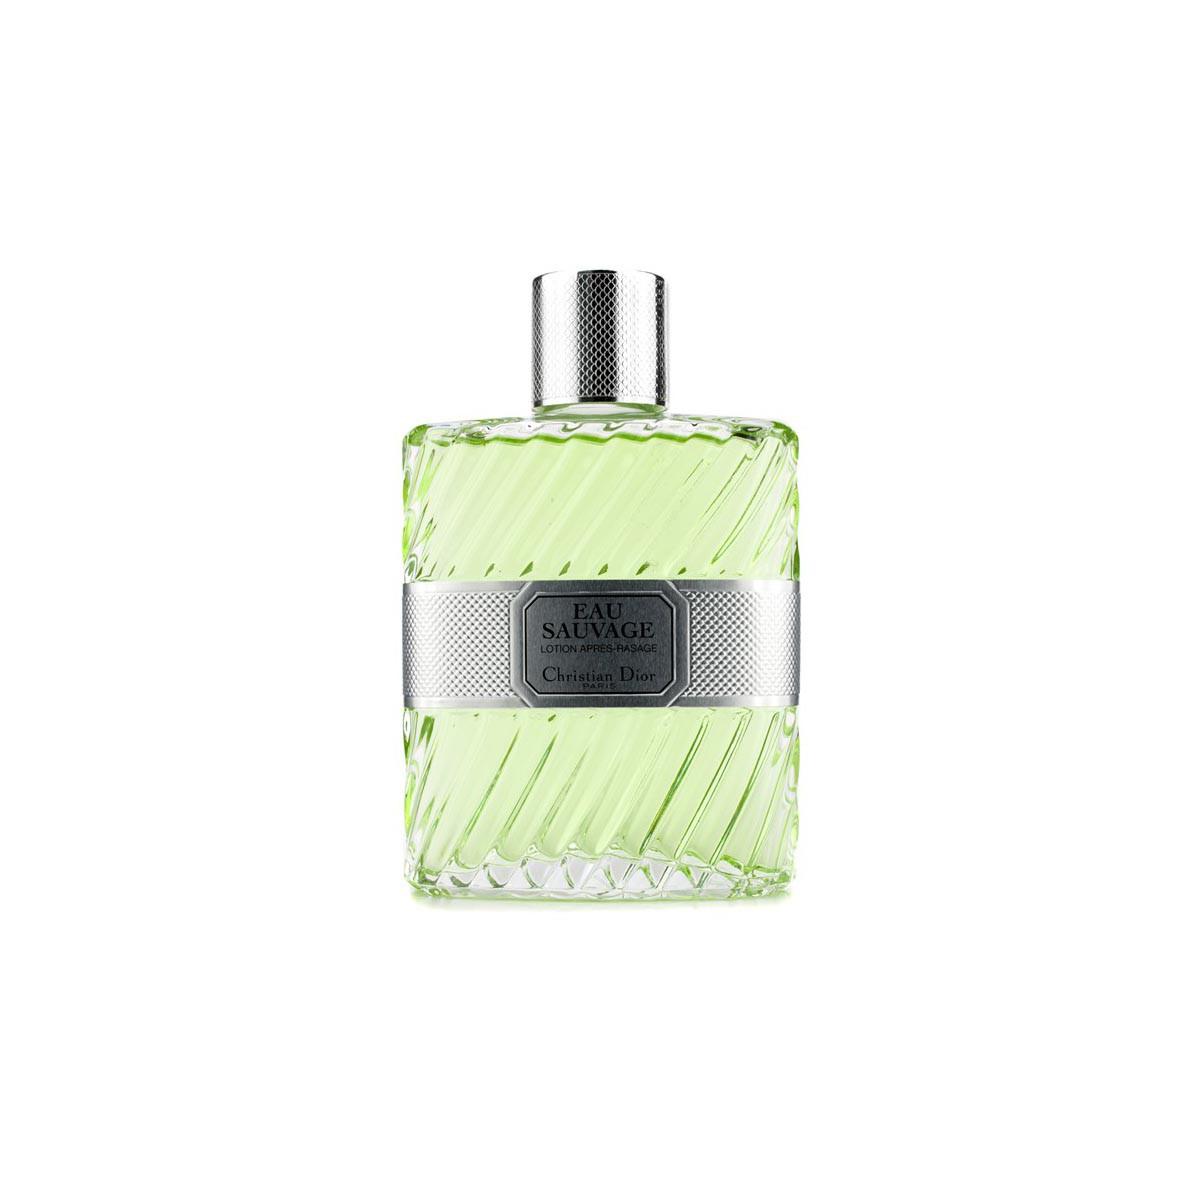 Dior Eau Sauvage After Shave 200ml 